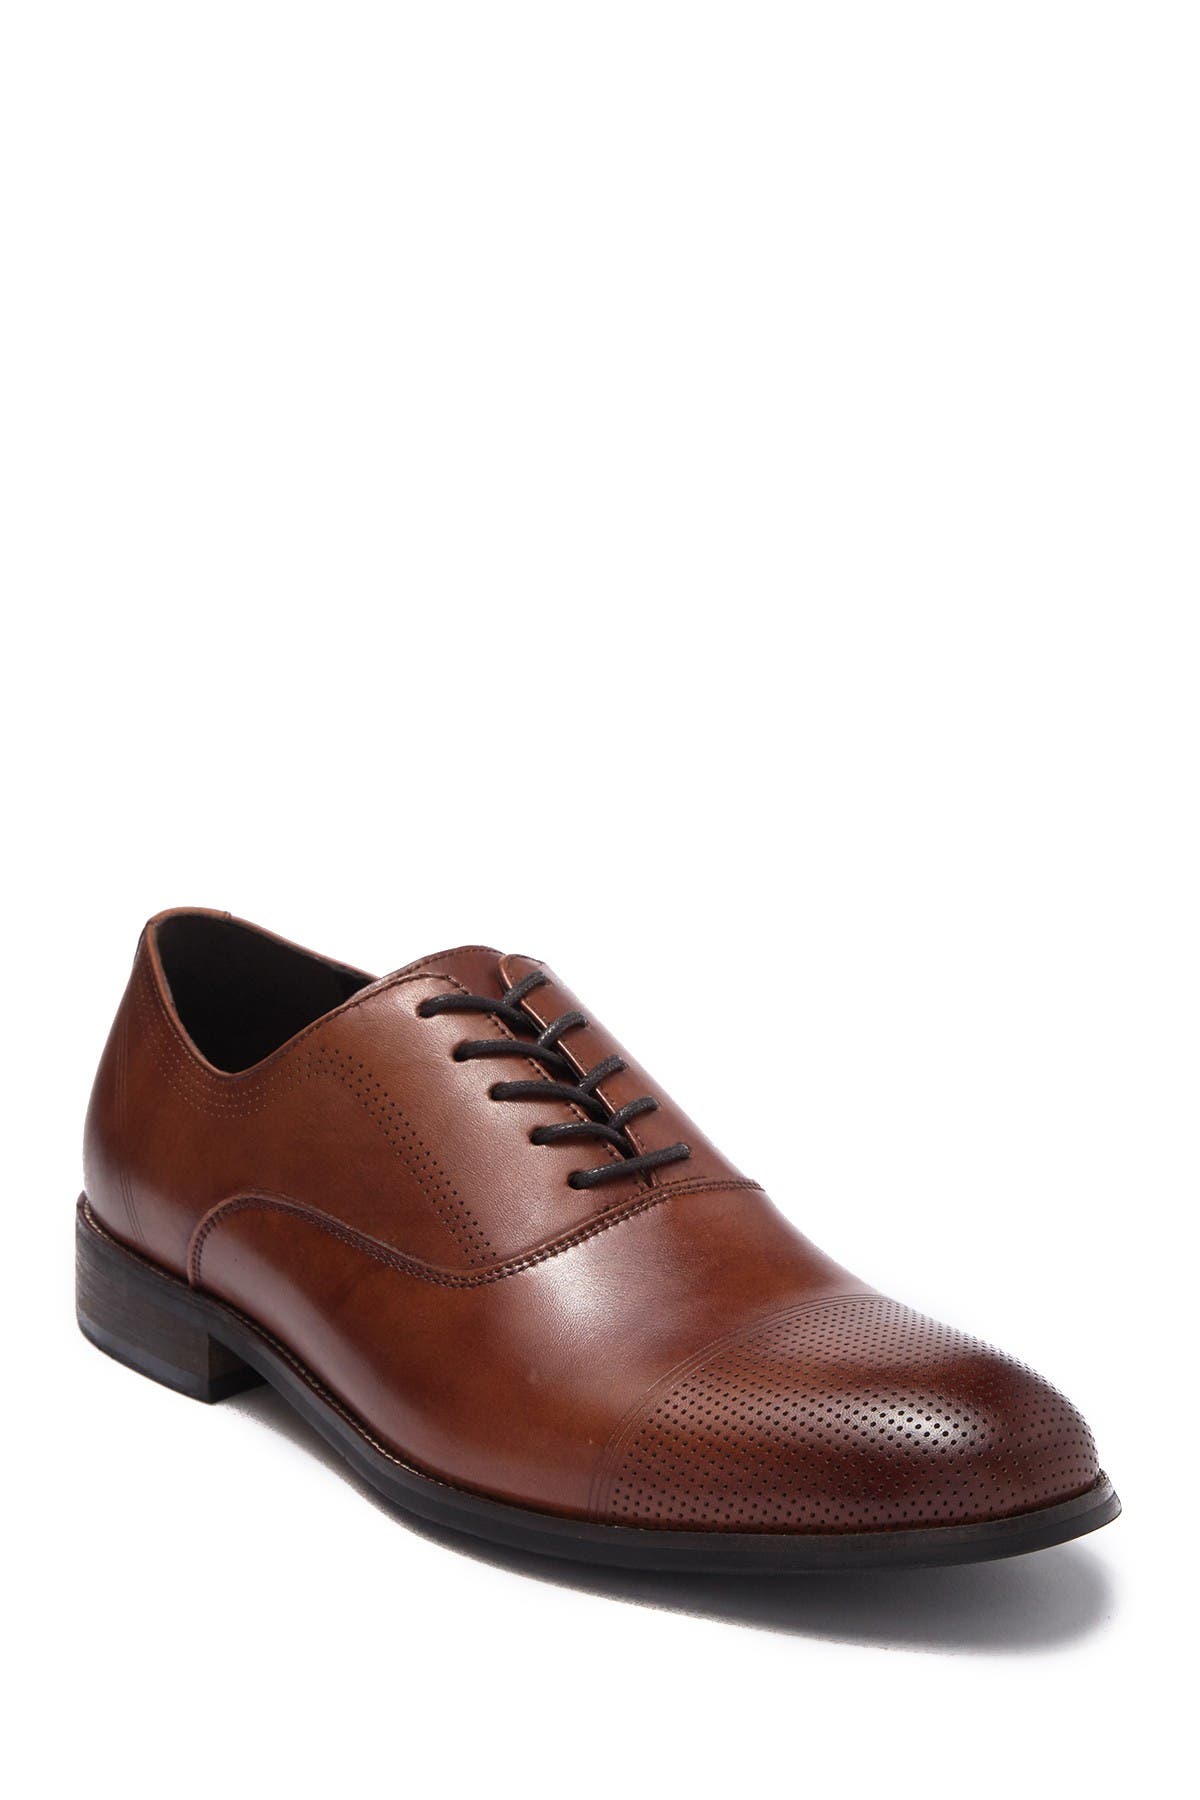 kenneth cole reaction leather cap toe oxford